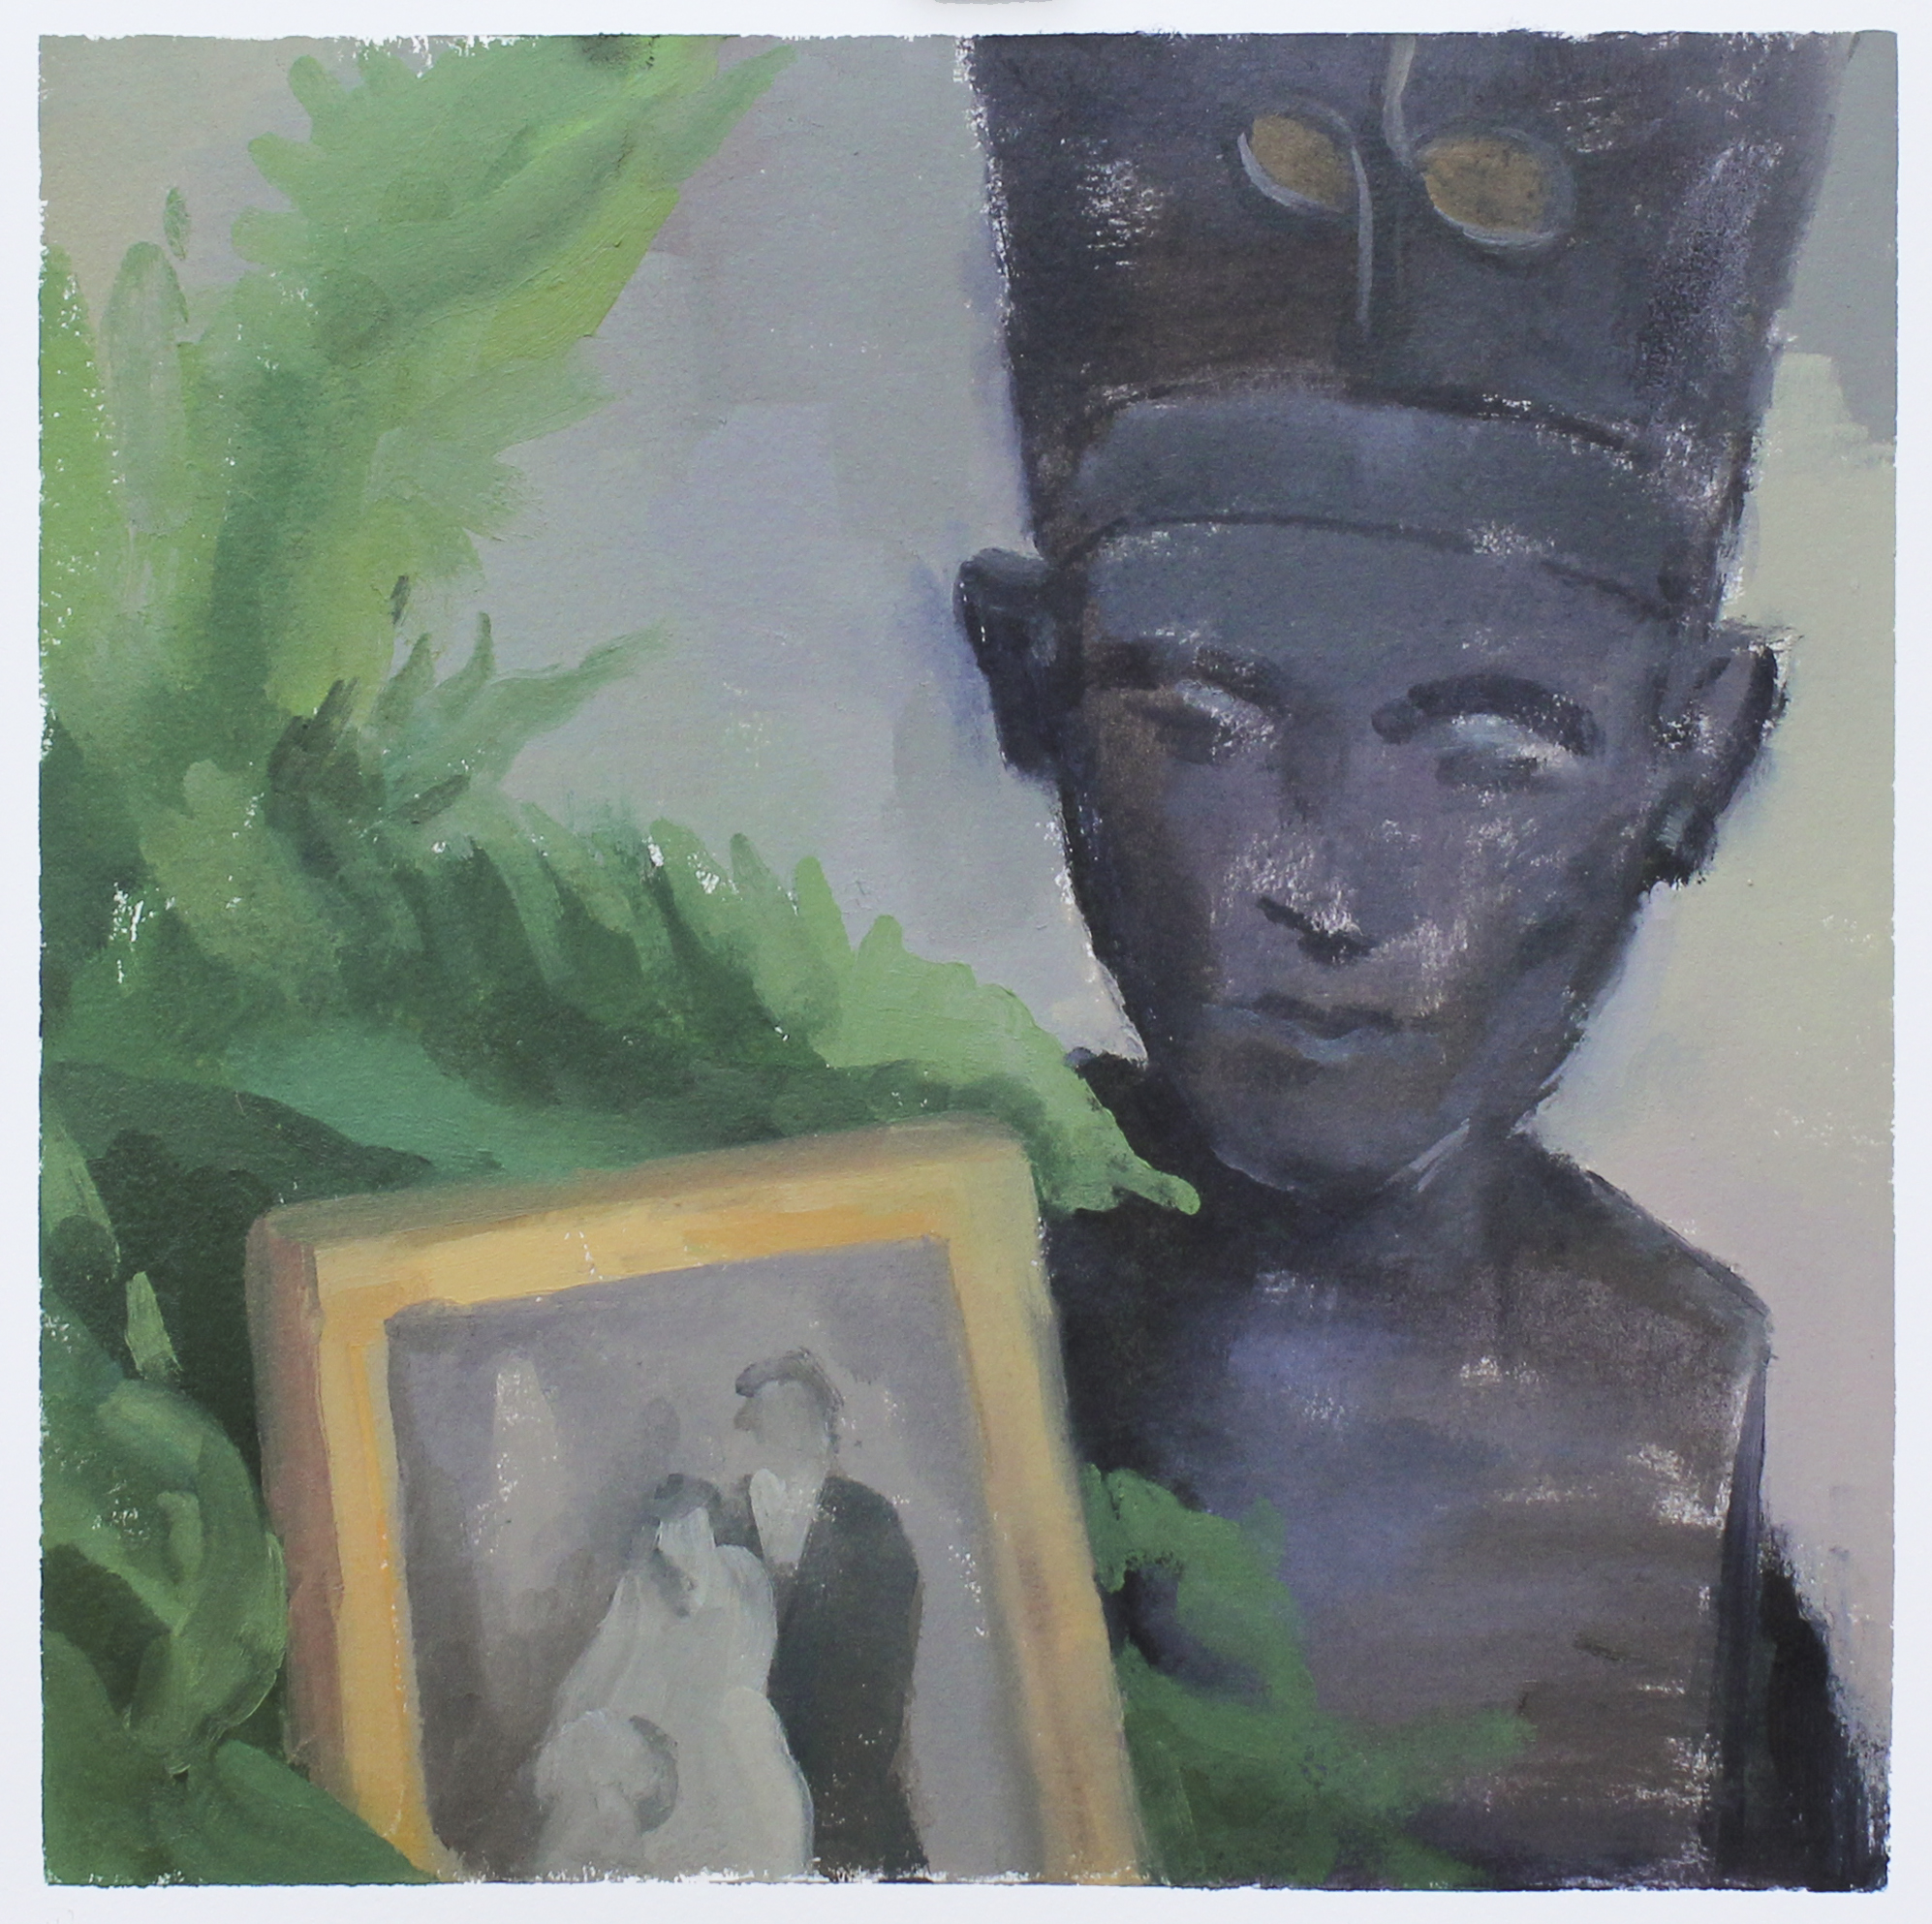    Nefertiti with Ferns and Framed Photo     oil on paper 11.25 x 11.25" 2017   purchase  